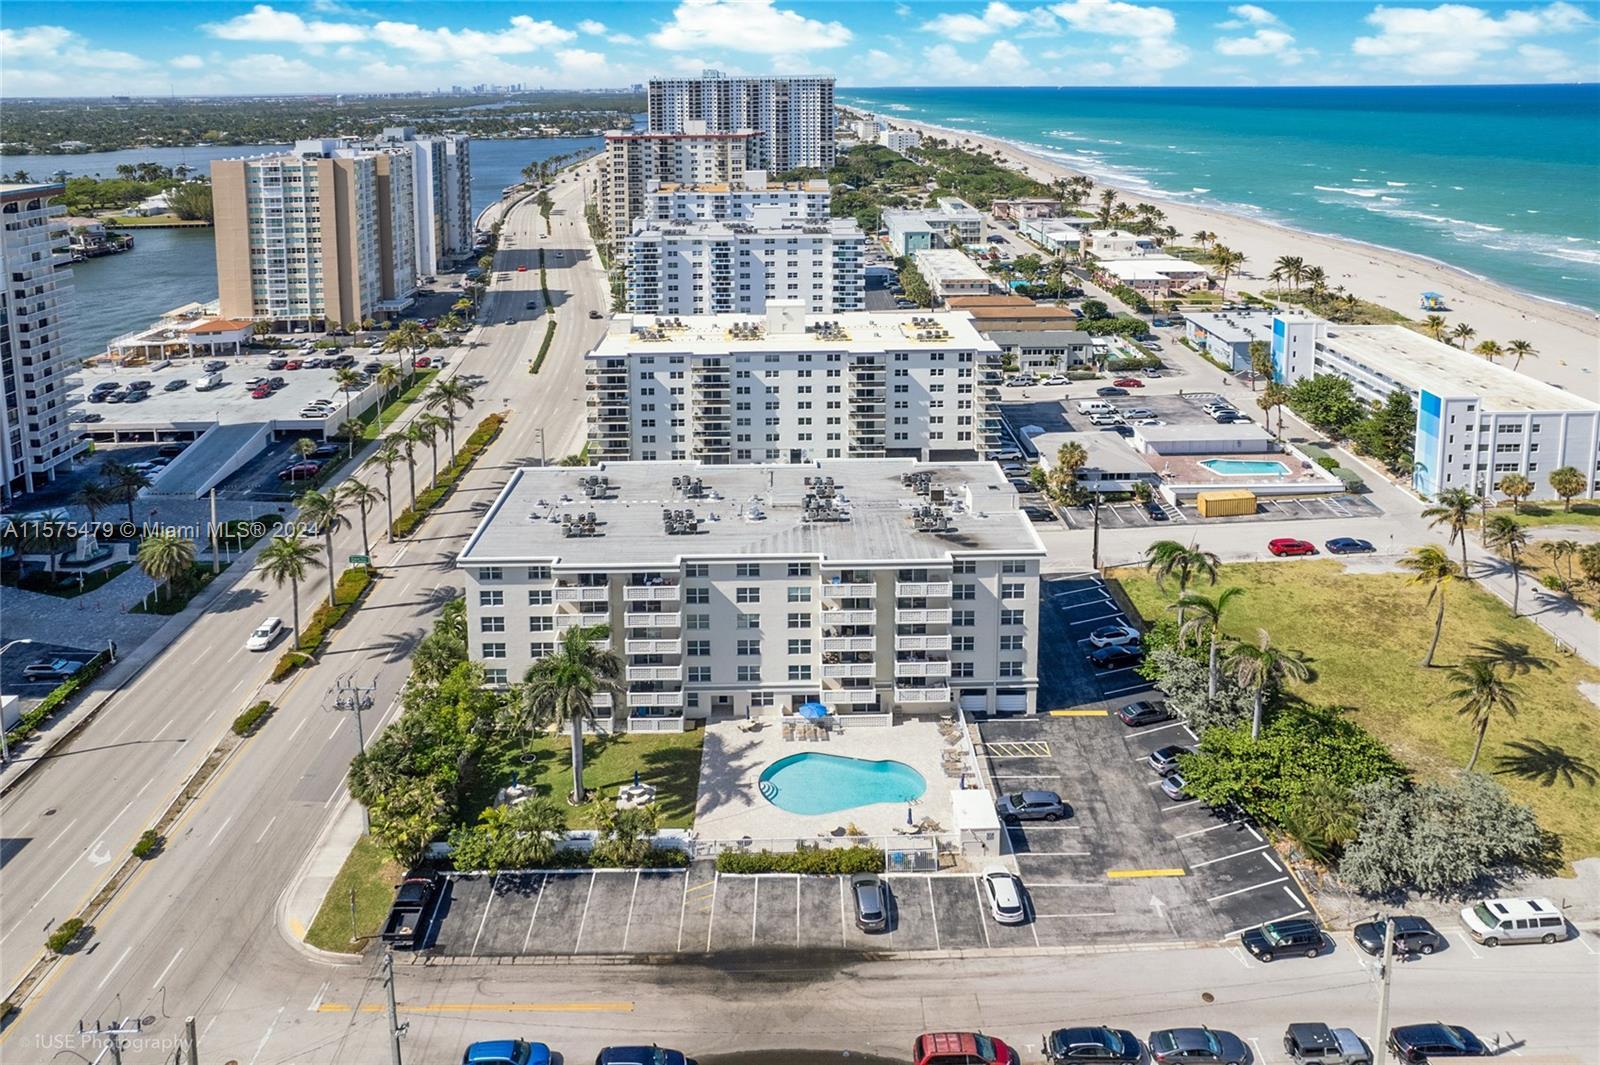 Own a slice of paradise at this stunning condo, just steps from the world-famous Hollywood Beach! A 